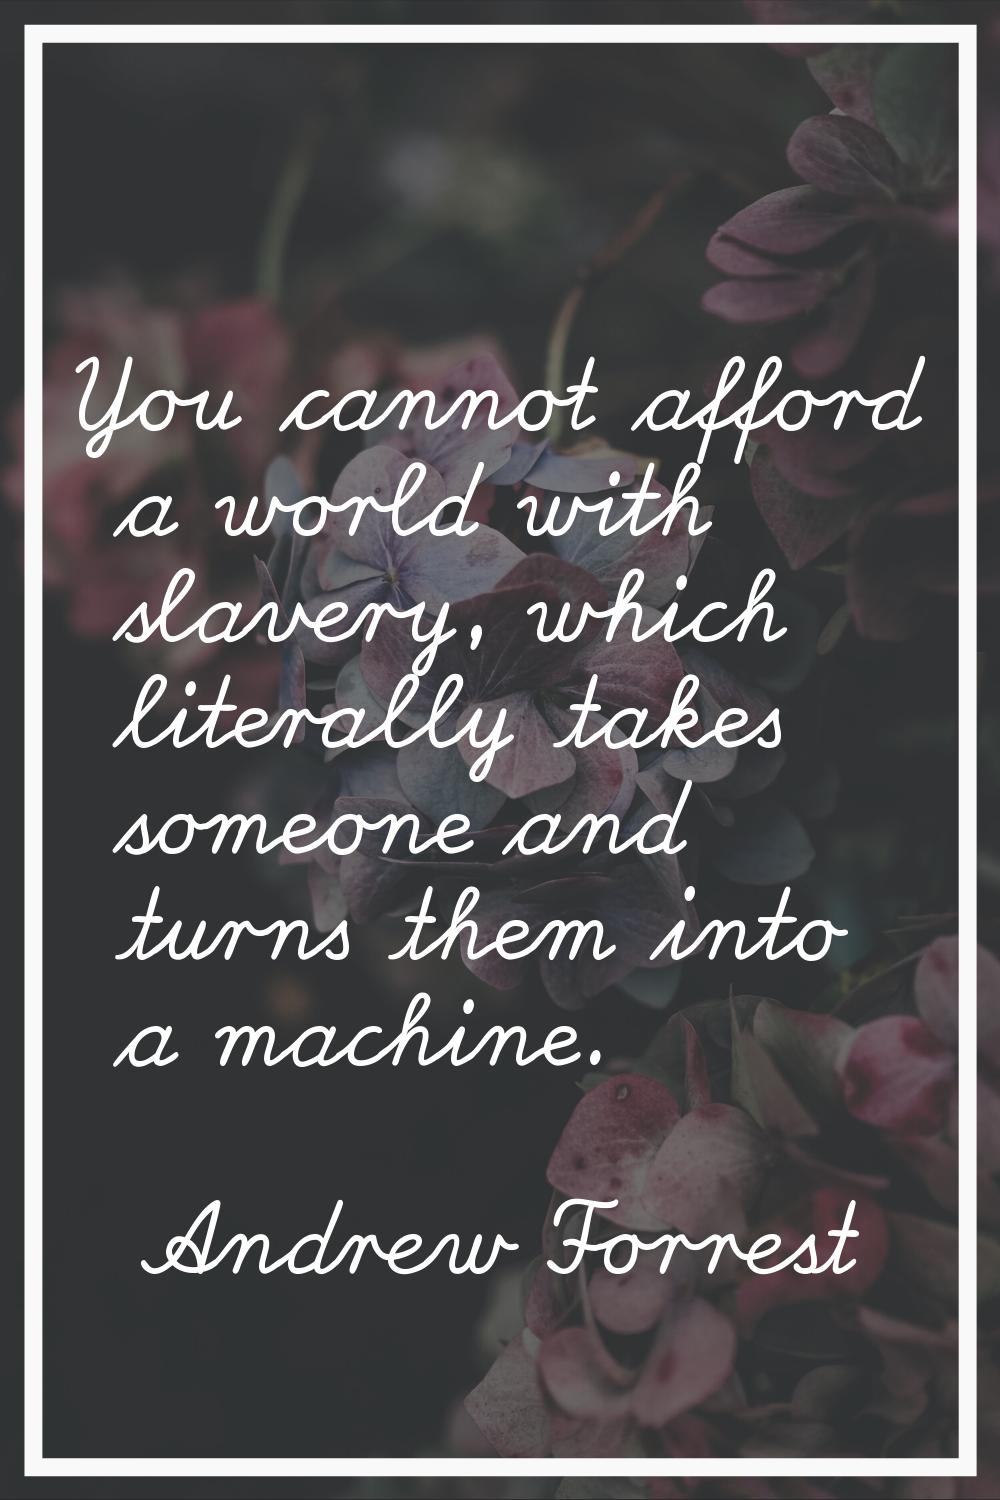 You cannot afford a world with slavery, which literally takes someone and turns them into a machine